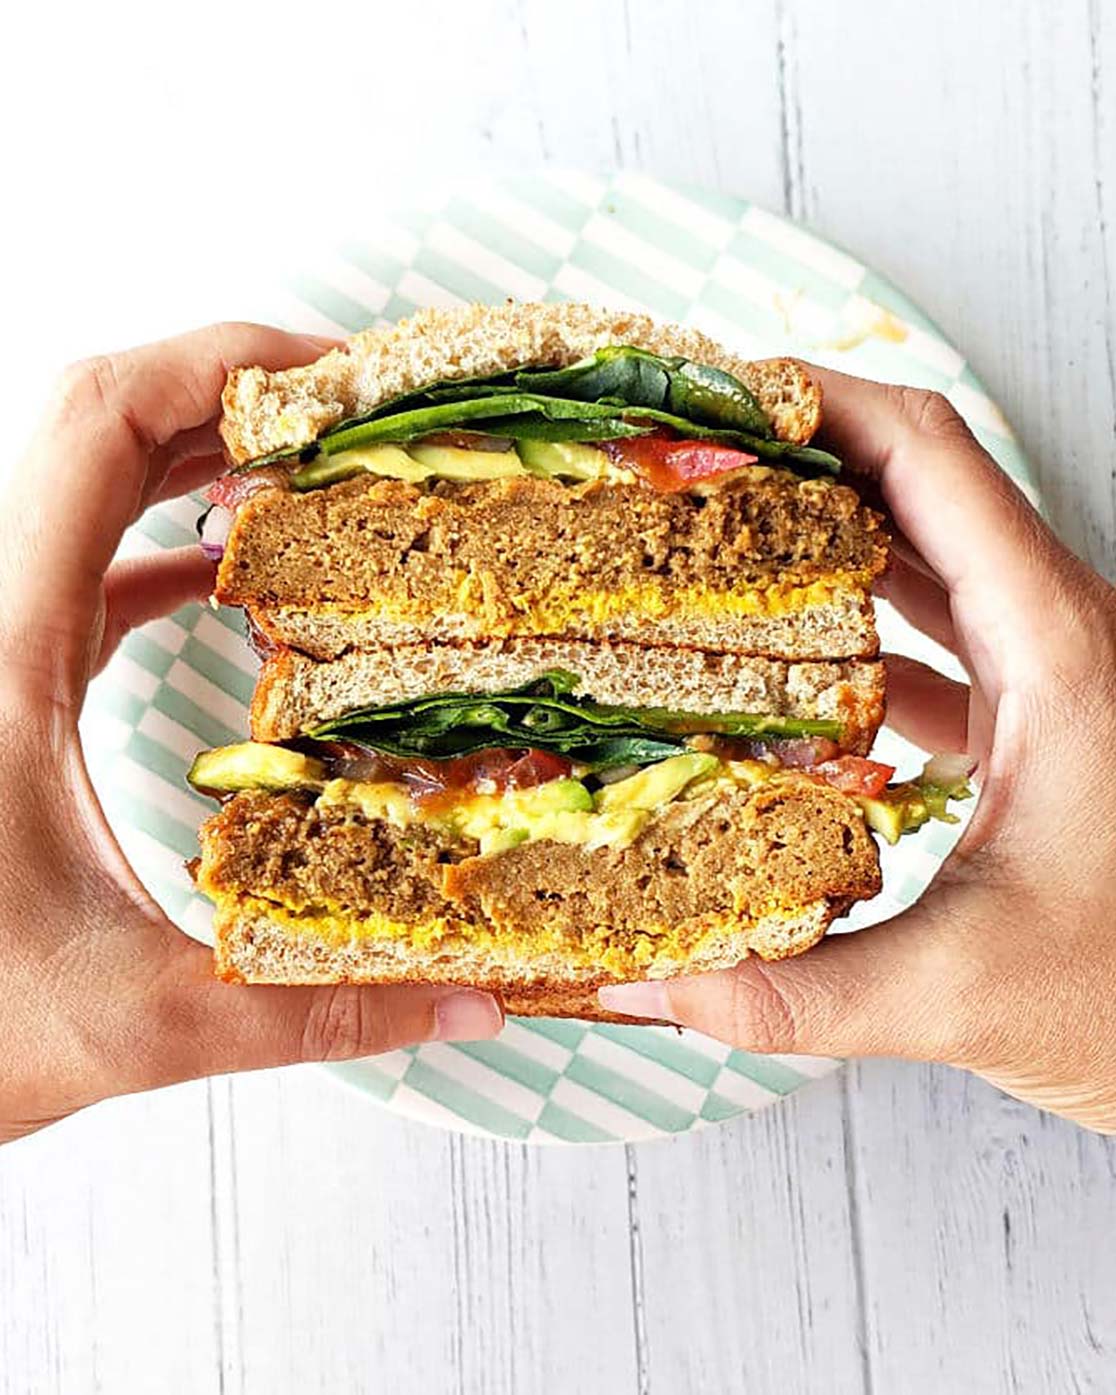 Hands holding a stacked vegan meat and salad sandwich.